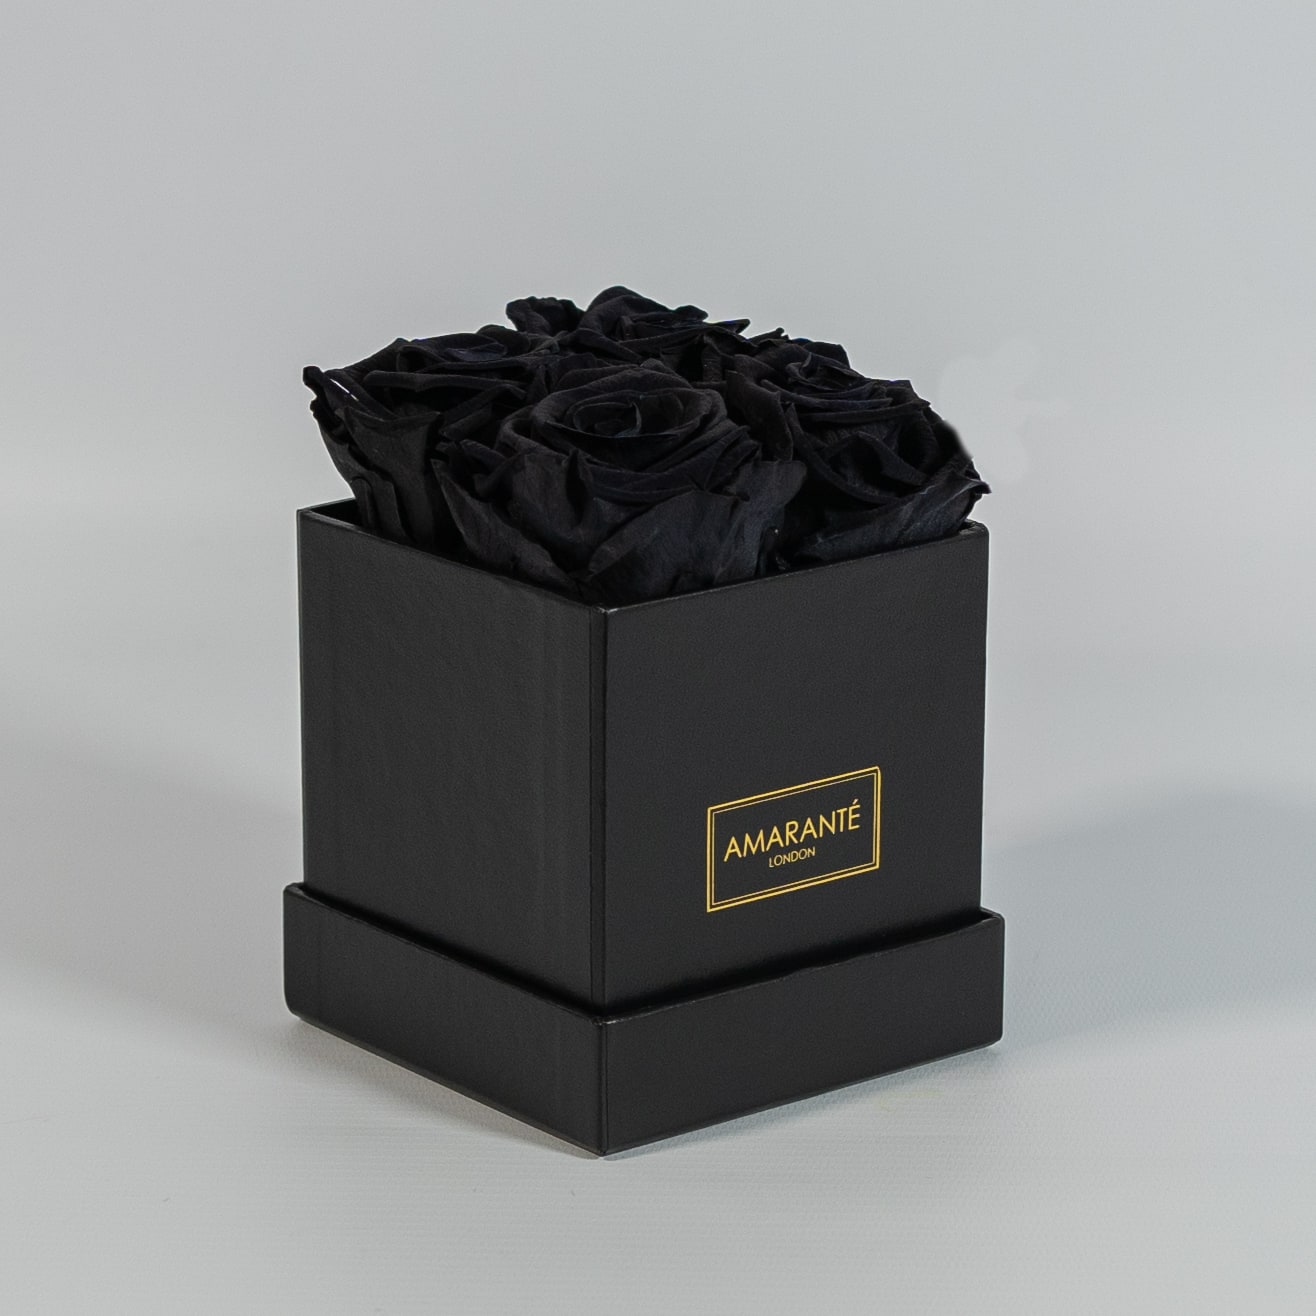 SW Black Real Rose Dipped in 24k Gold Foil Elegant Flower Eternal Love  Romantic Rose Decor Gift w/Nice Box for Valentine's Day, Mother's Day,  Thanksgiving Day, Birthday : Amazon.in: Home & Kitchen